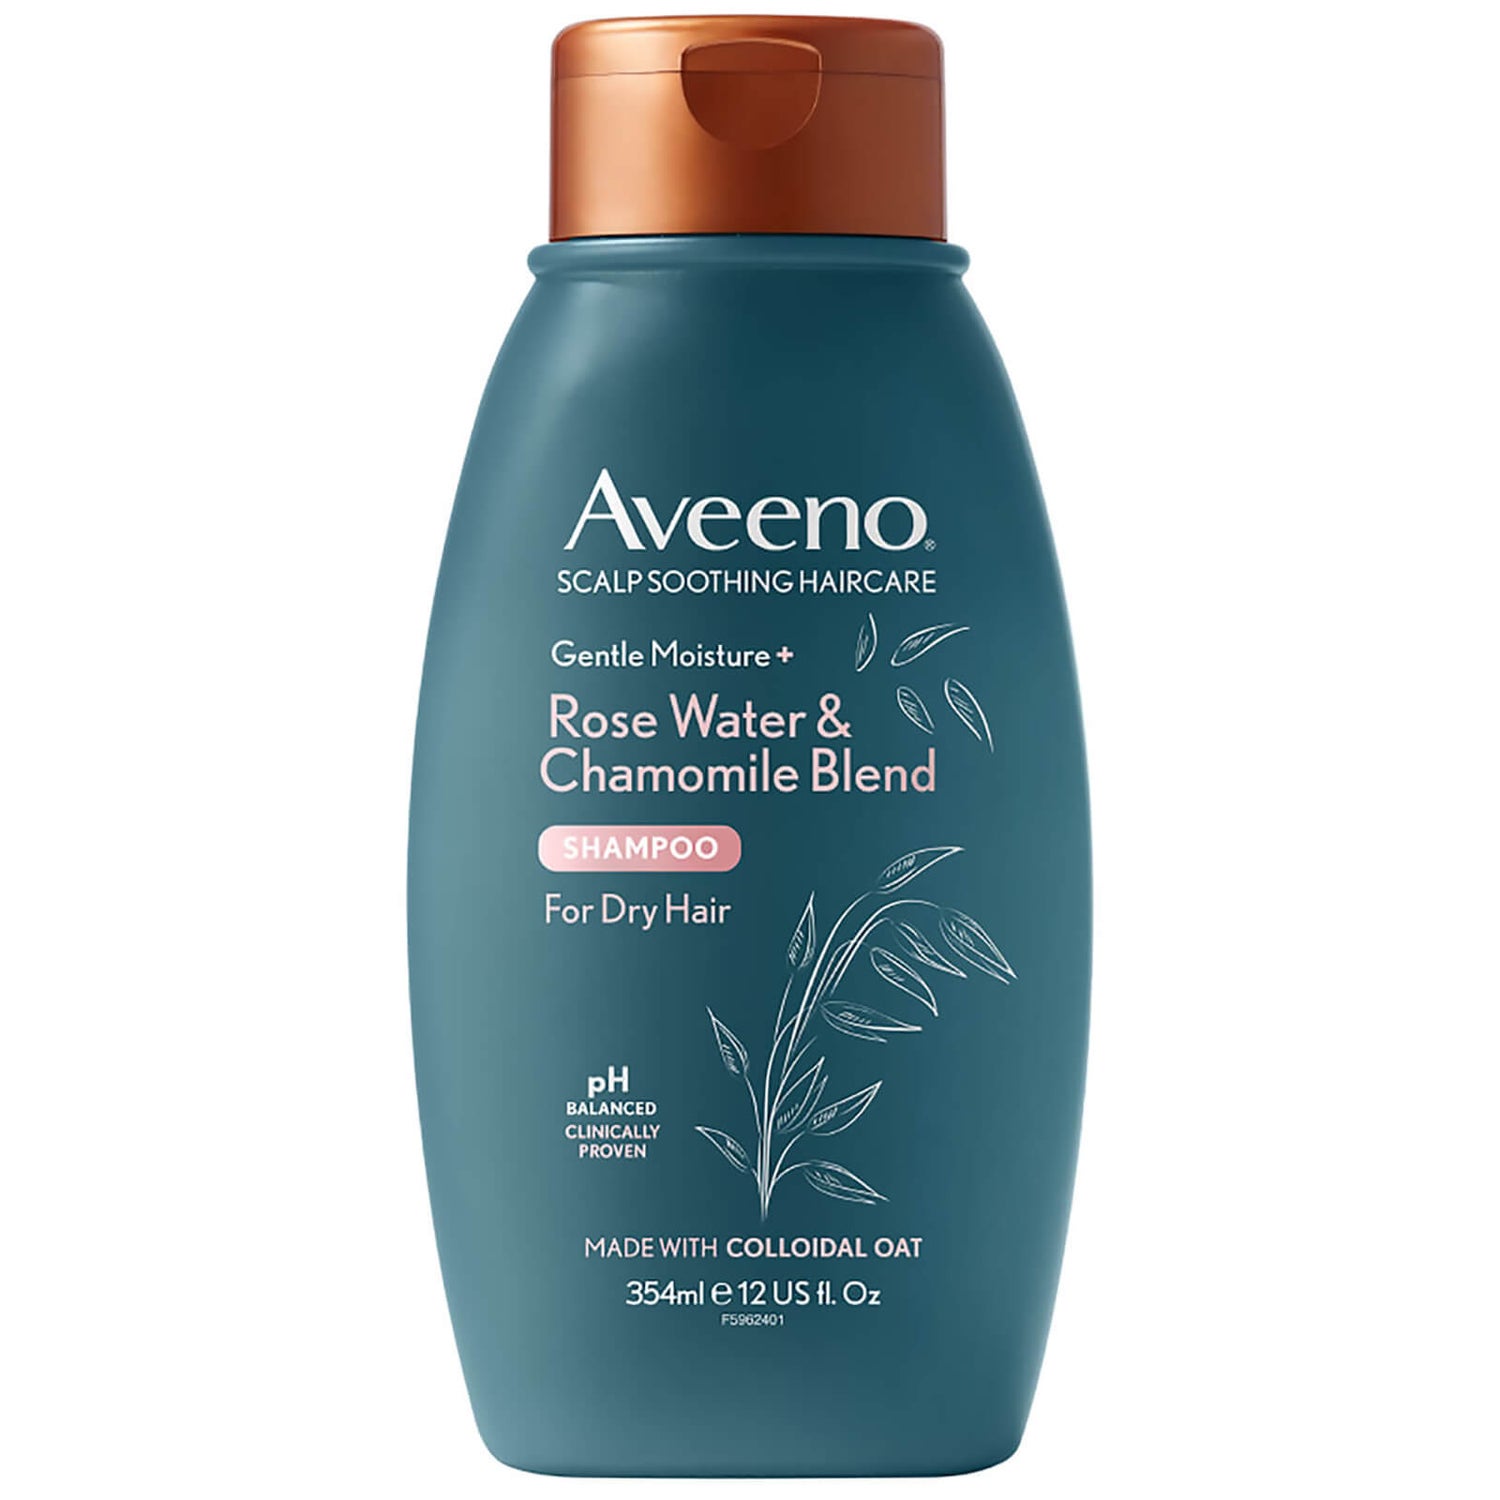 Aveeno Scalp Soothing Haircare Gentle Moisture Rosewater and Chamomile Shampoo 354ml